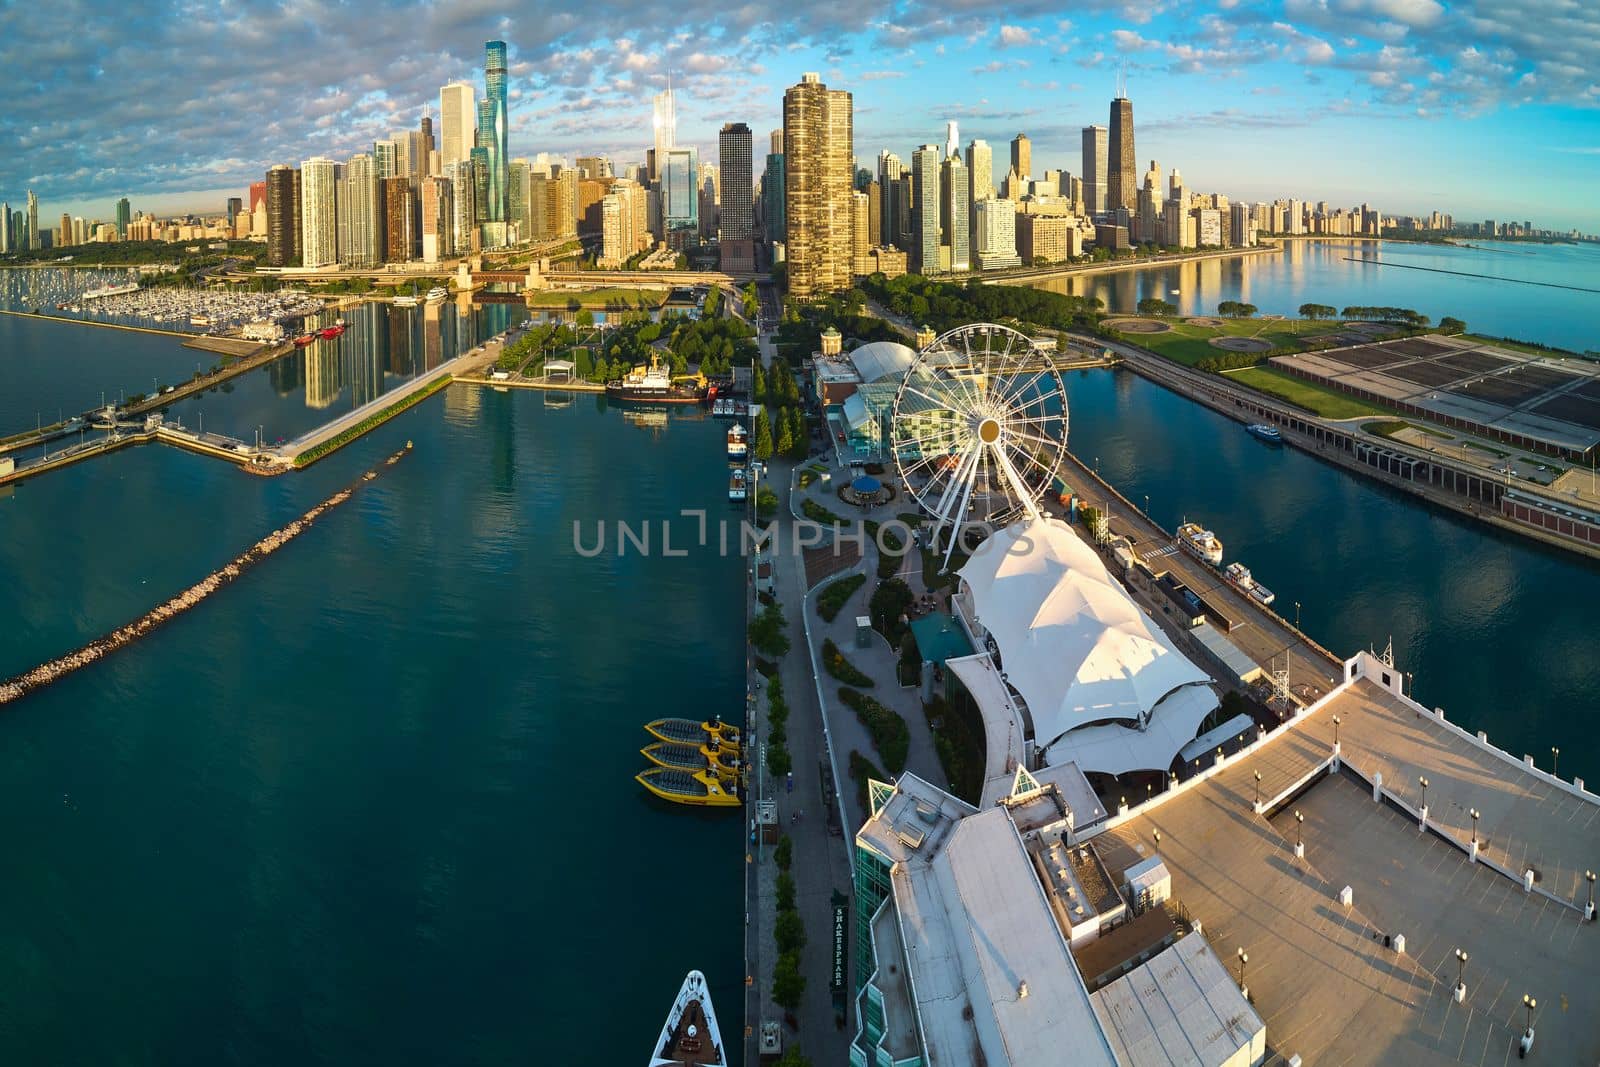 Warped panorama of Chicago Navy Pier and skyline in morning light by njproductions